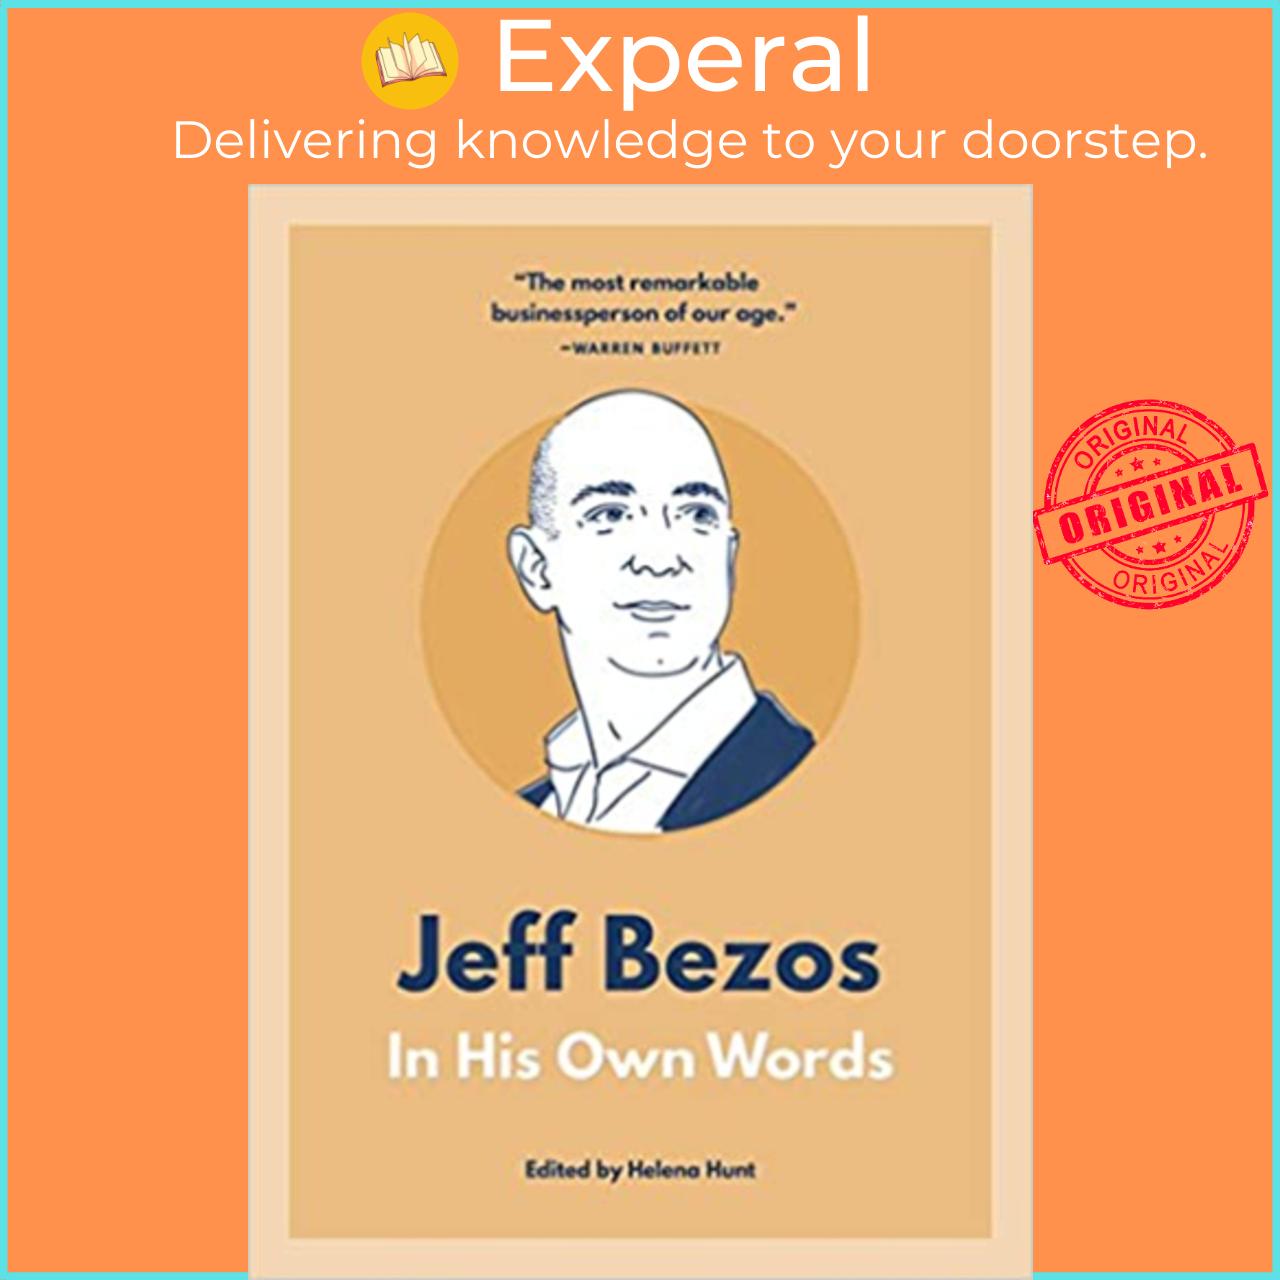 Sách - Jeff Bezos: In His Own Words by Helena Hunt (US edition, paperback)